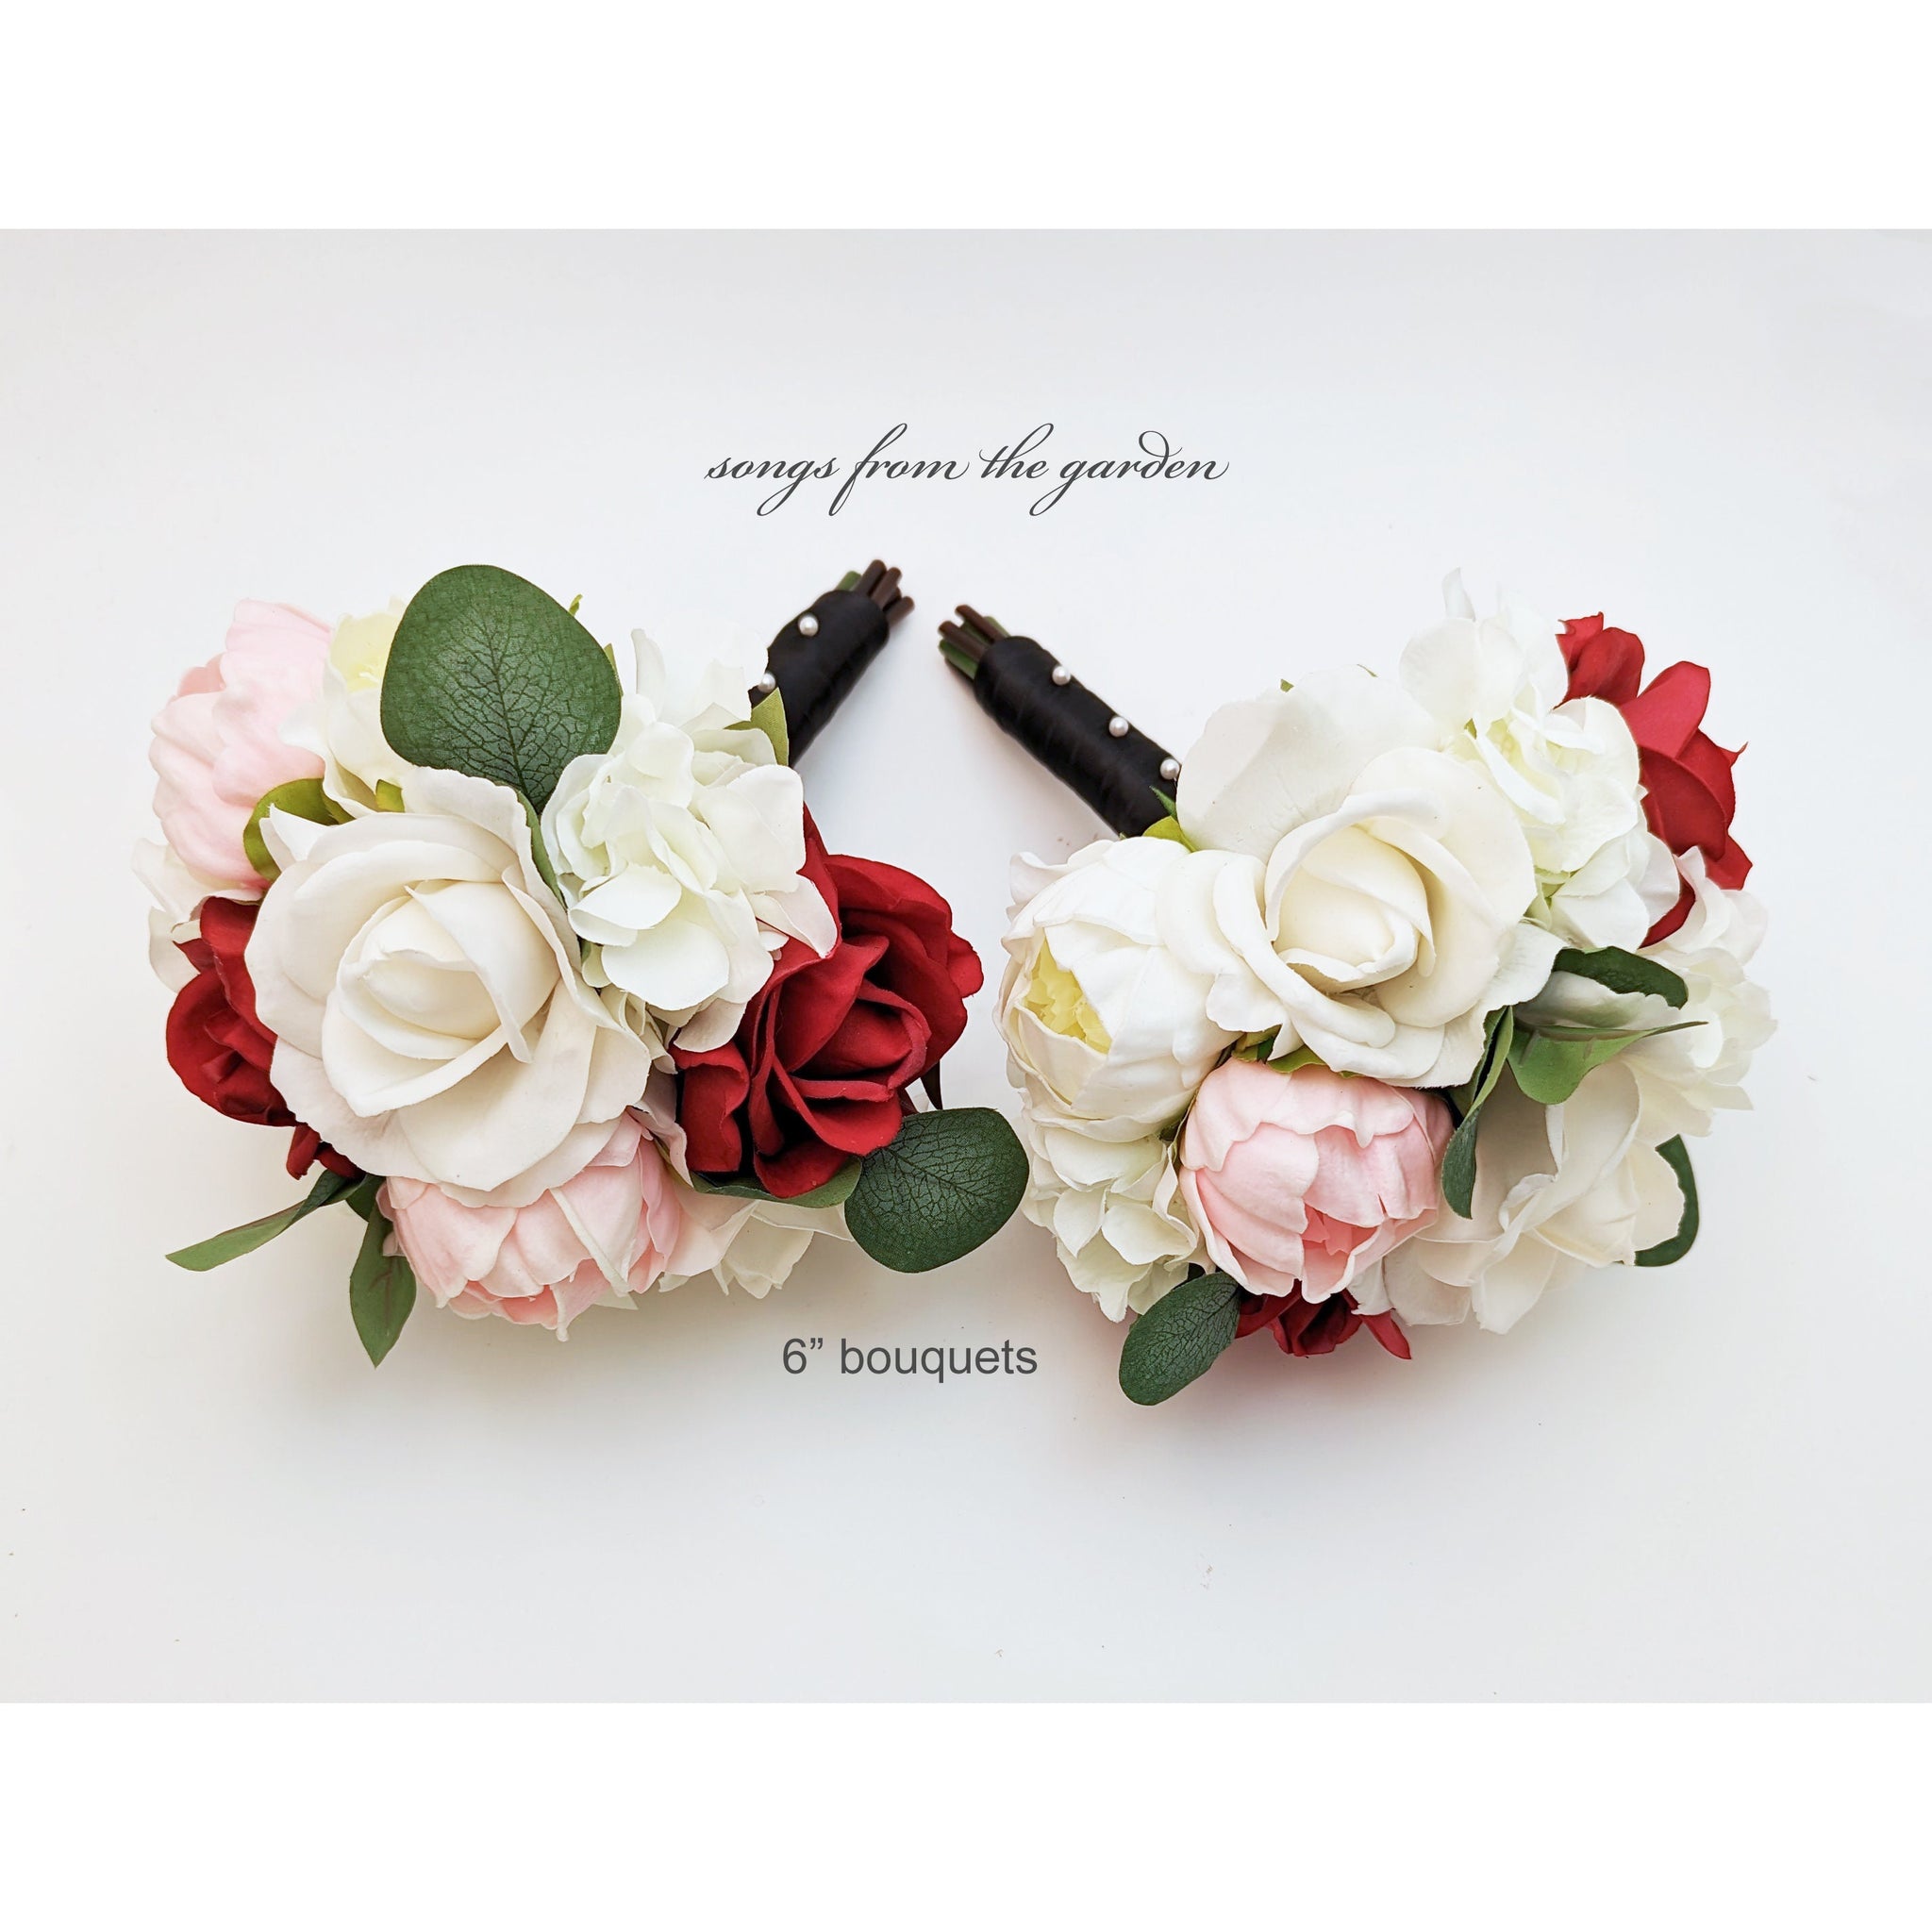 Blush Gold Red Bridal or Bridesmaid Bouquet Eucalyptus Peonies Roses - Add Boutonniere Corsage Wedding Centerpiece Crown & More!